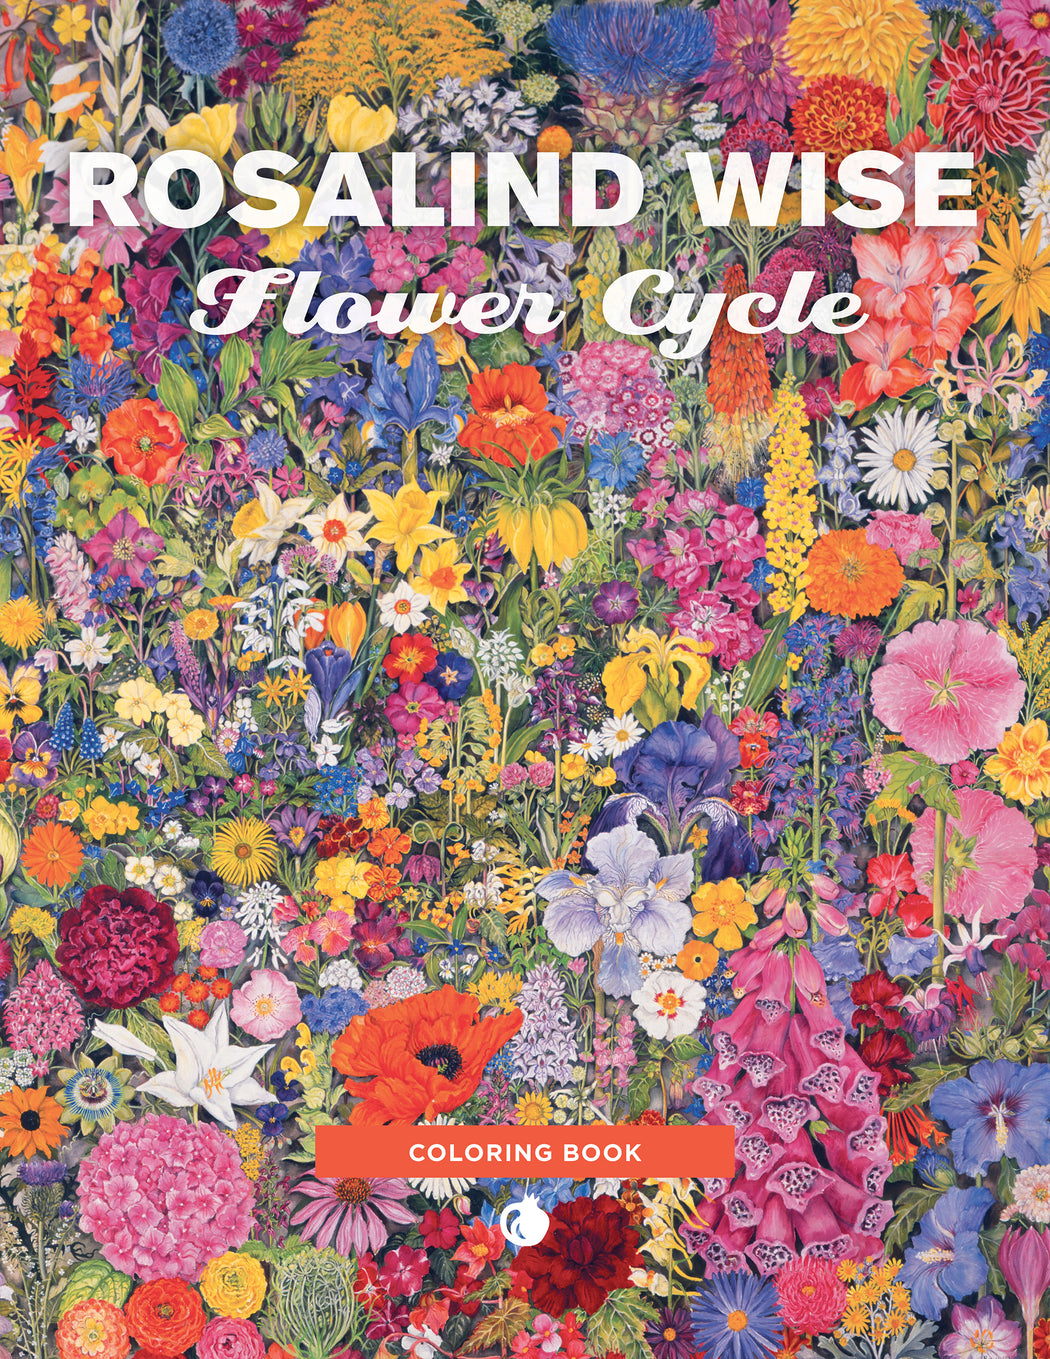 Rosalind Wise: Flower Cycle Coloring Book_Zoom